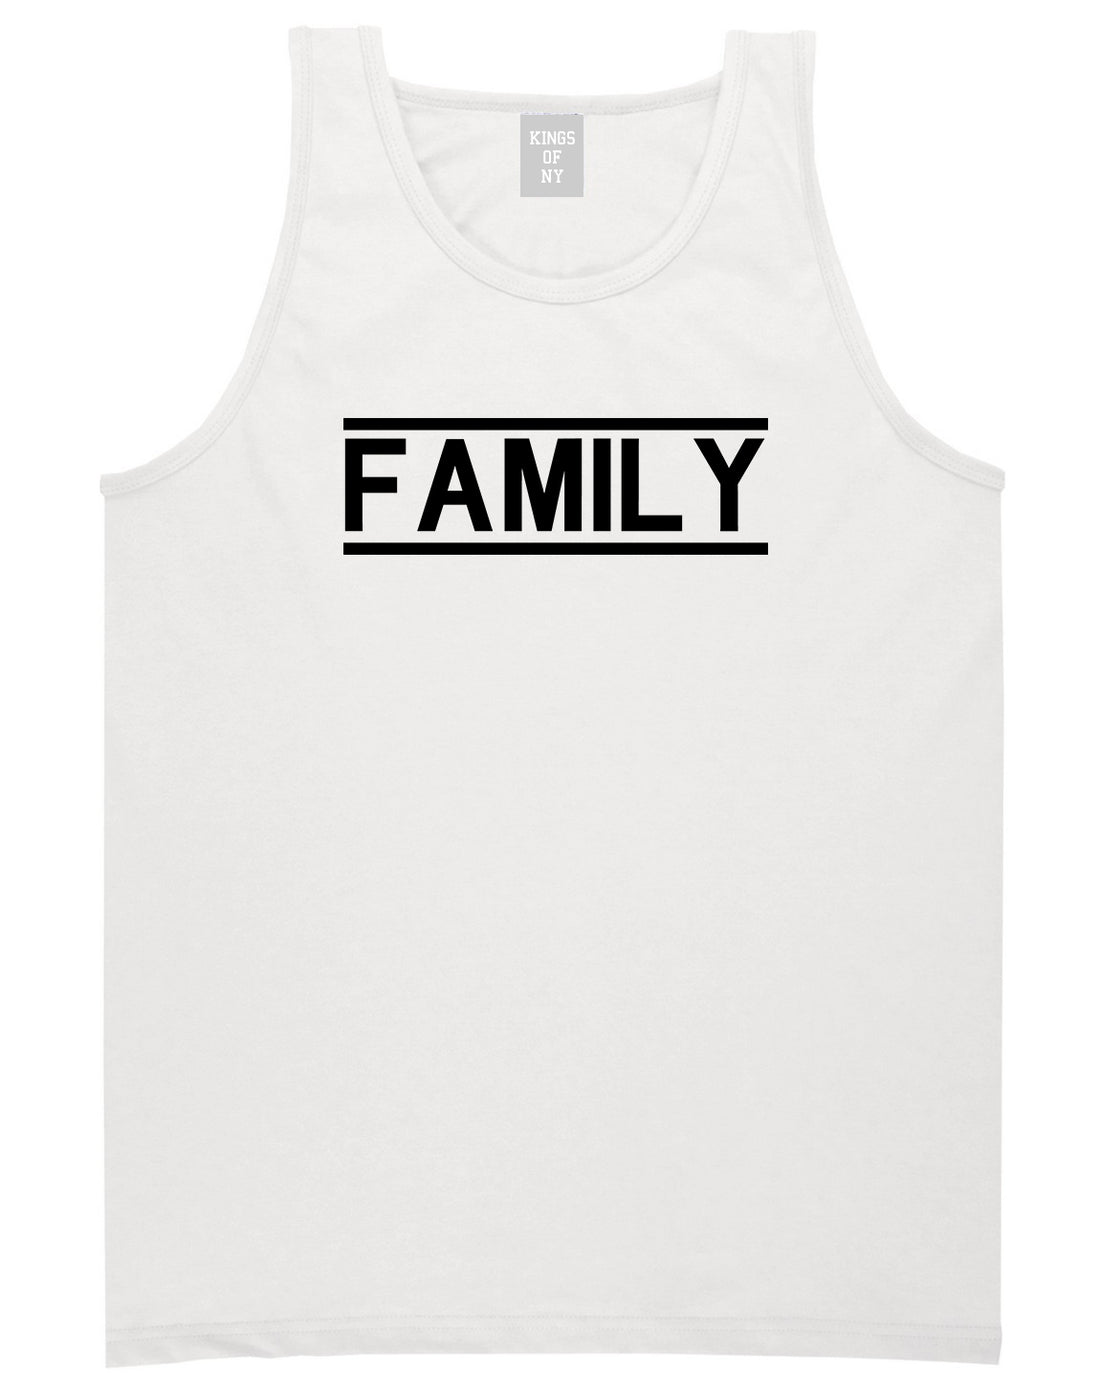 Family Fam Squad Mens White Tank Top Shirt by KINGS OF NY